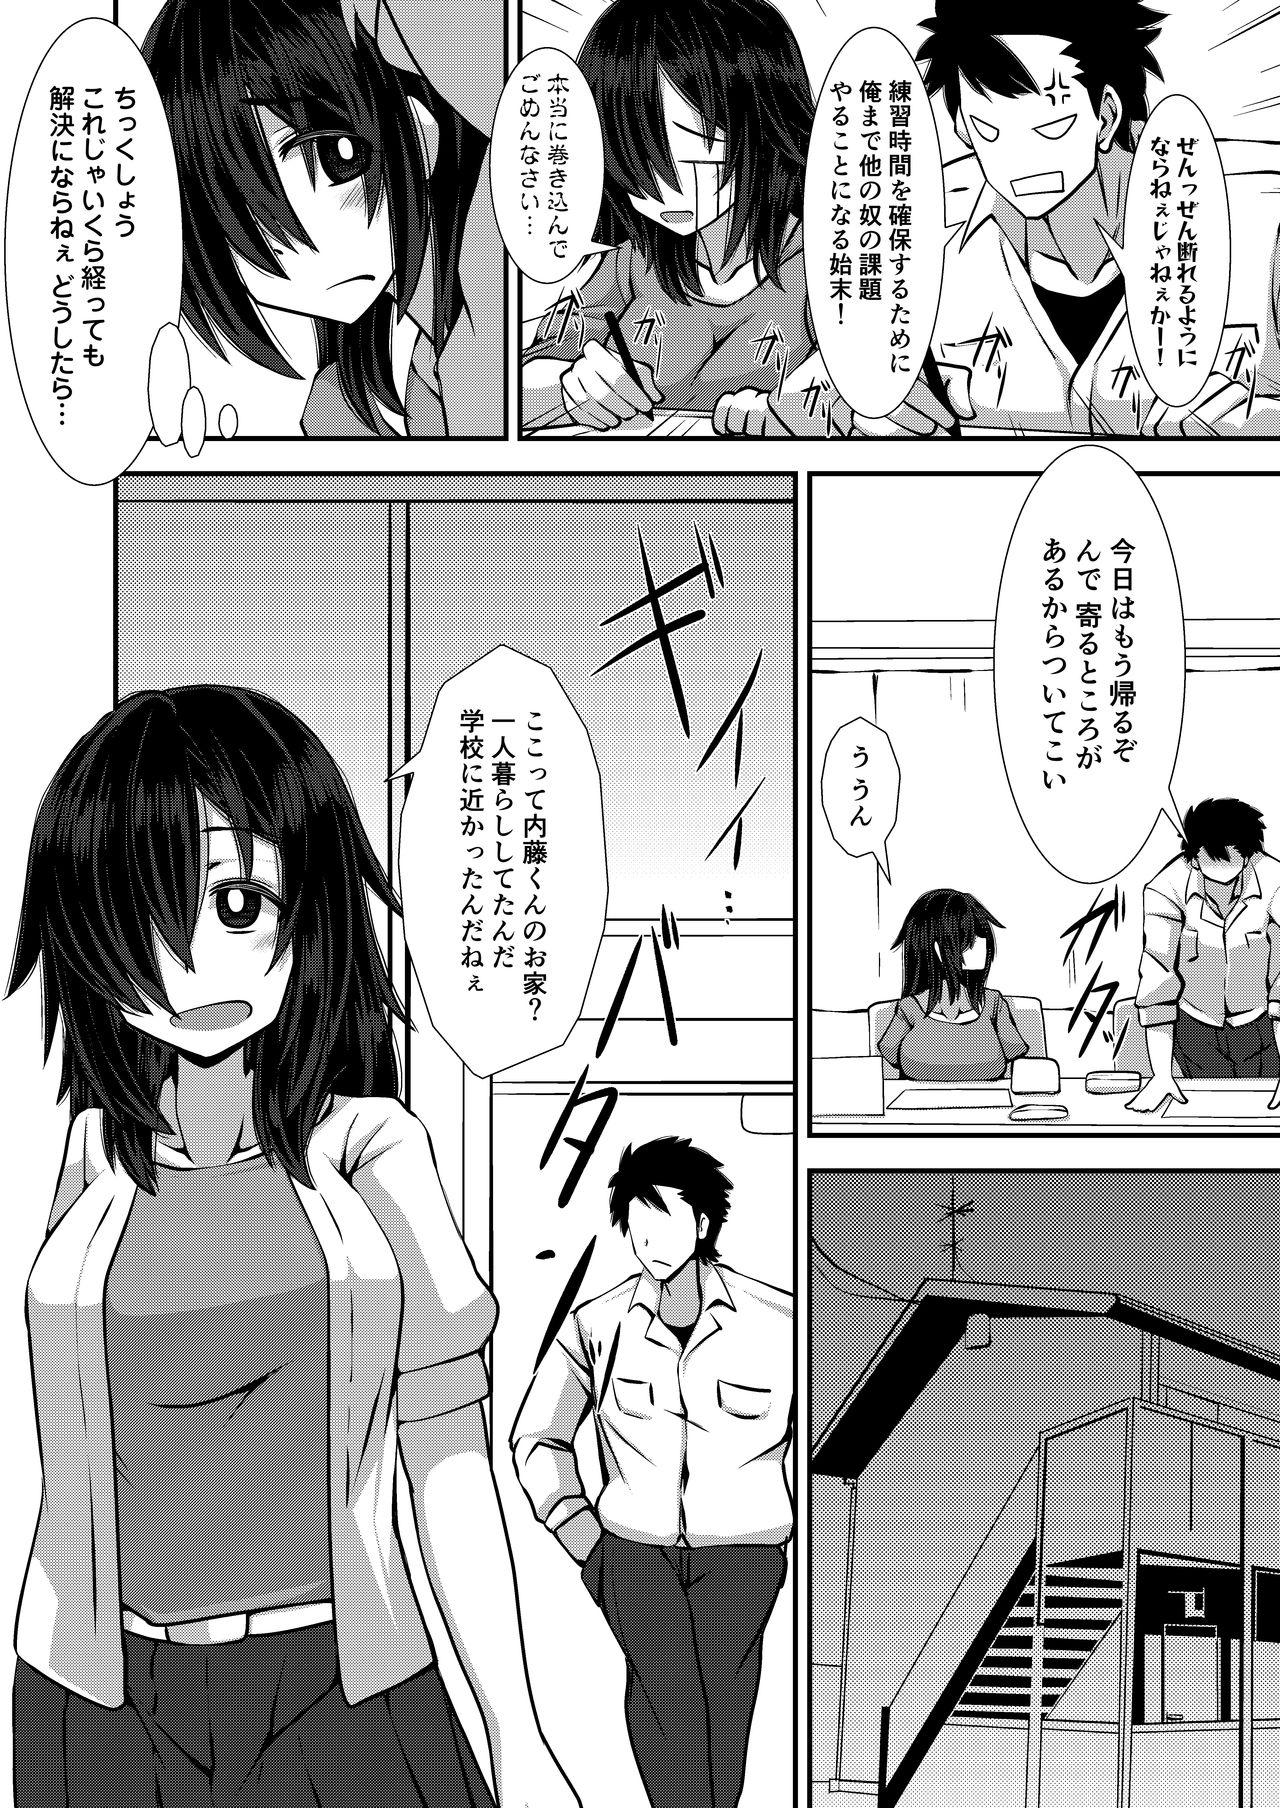 Ameteur Porn いいえと言ってよ！はいづかさん Real Sex - Page 10